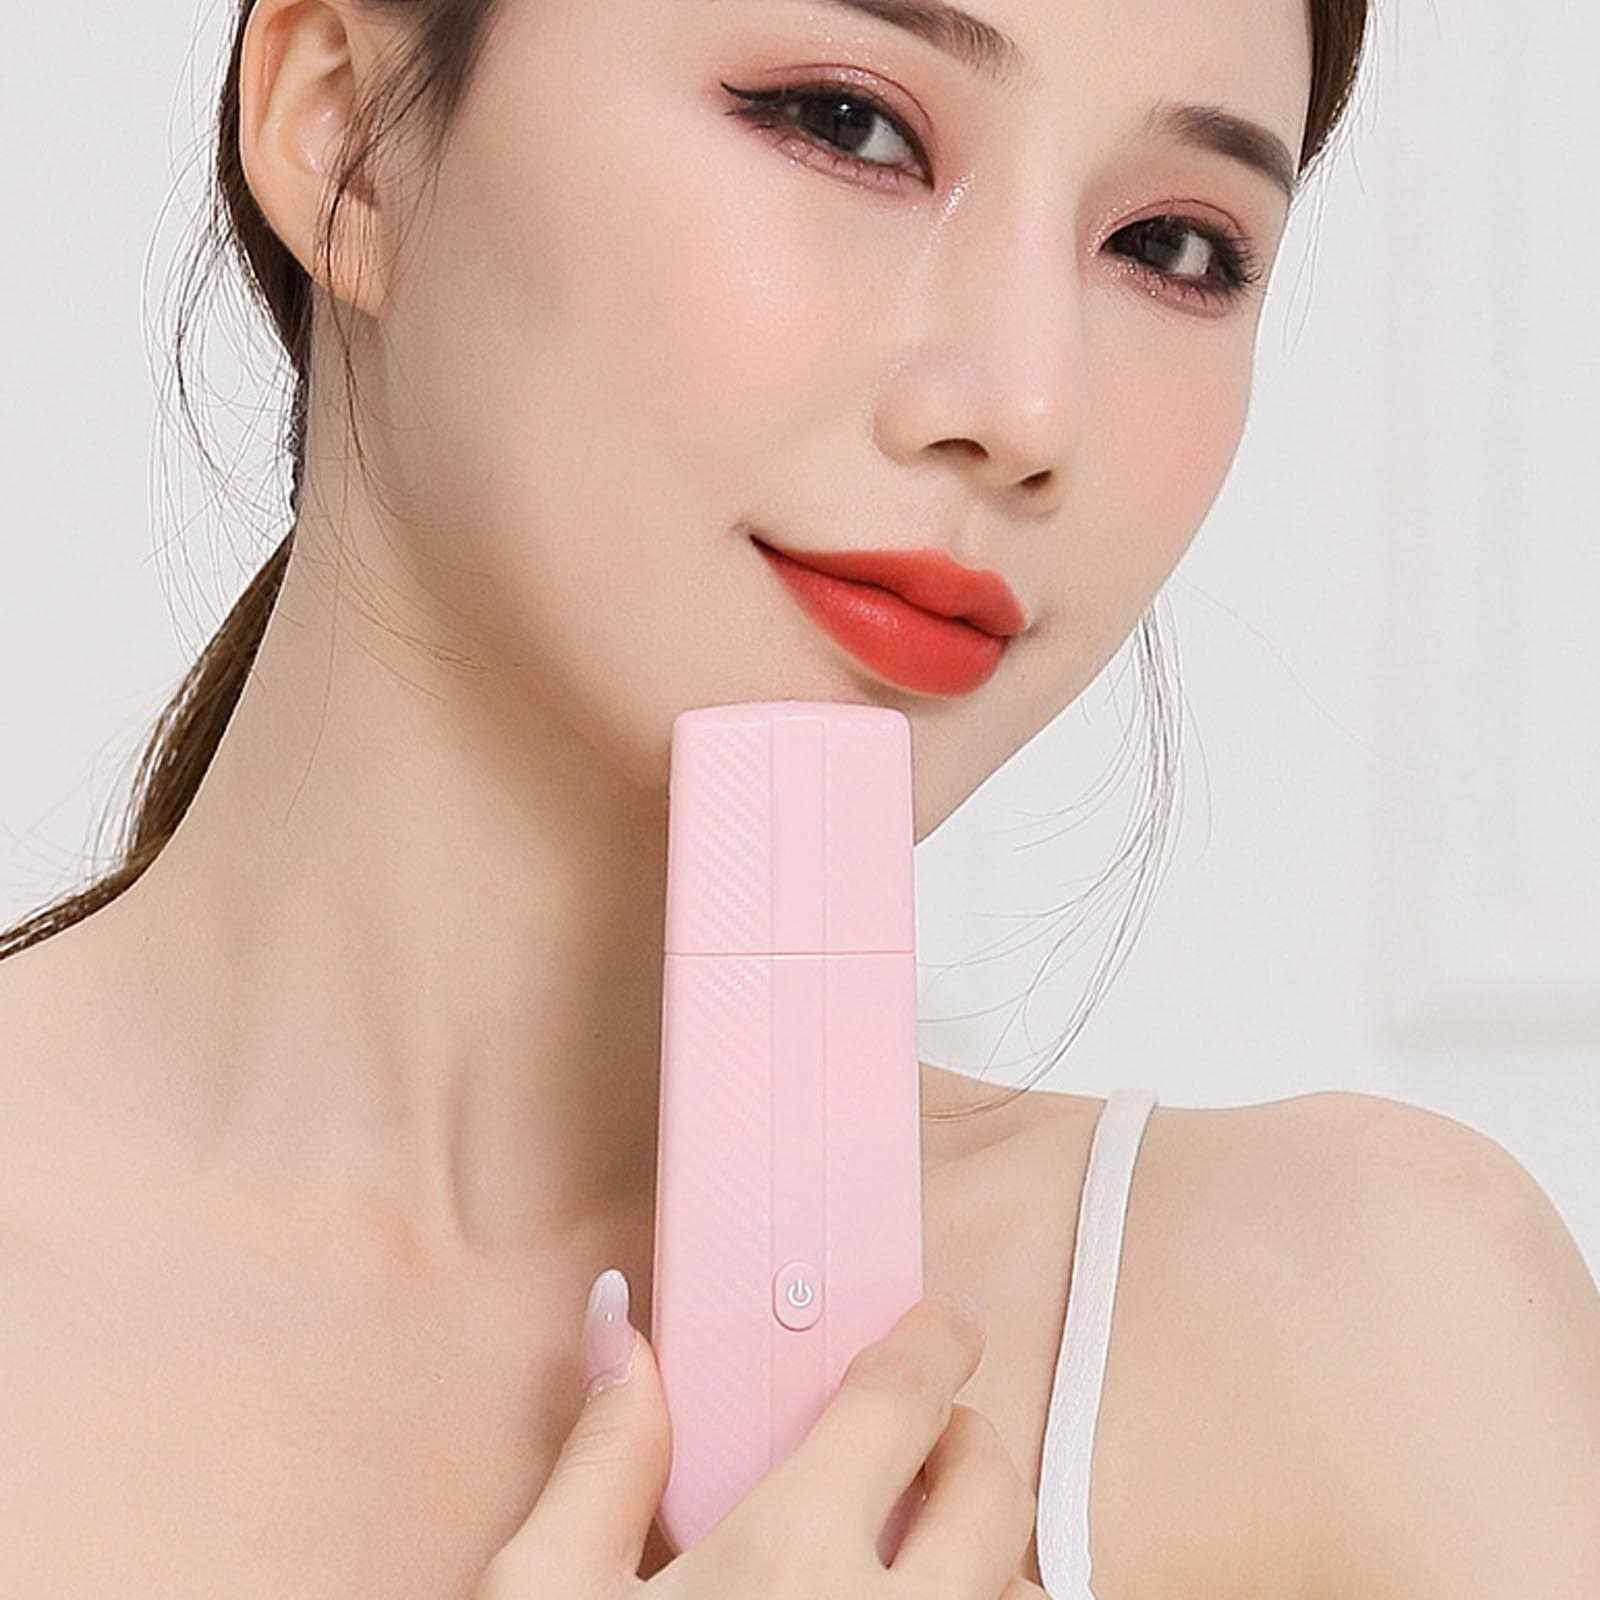 Skin Scrubber Facial Deep Cleansing Blackhead Removal Tool Pore Cleaning Nose Blackhead Remover Exfoliator Face Skin Lifting Tool USB Rechargeable (Pink)